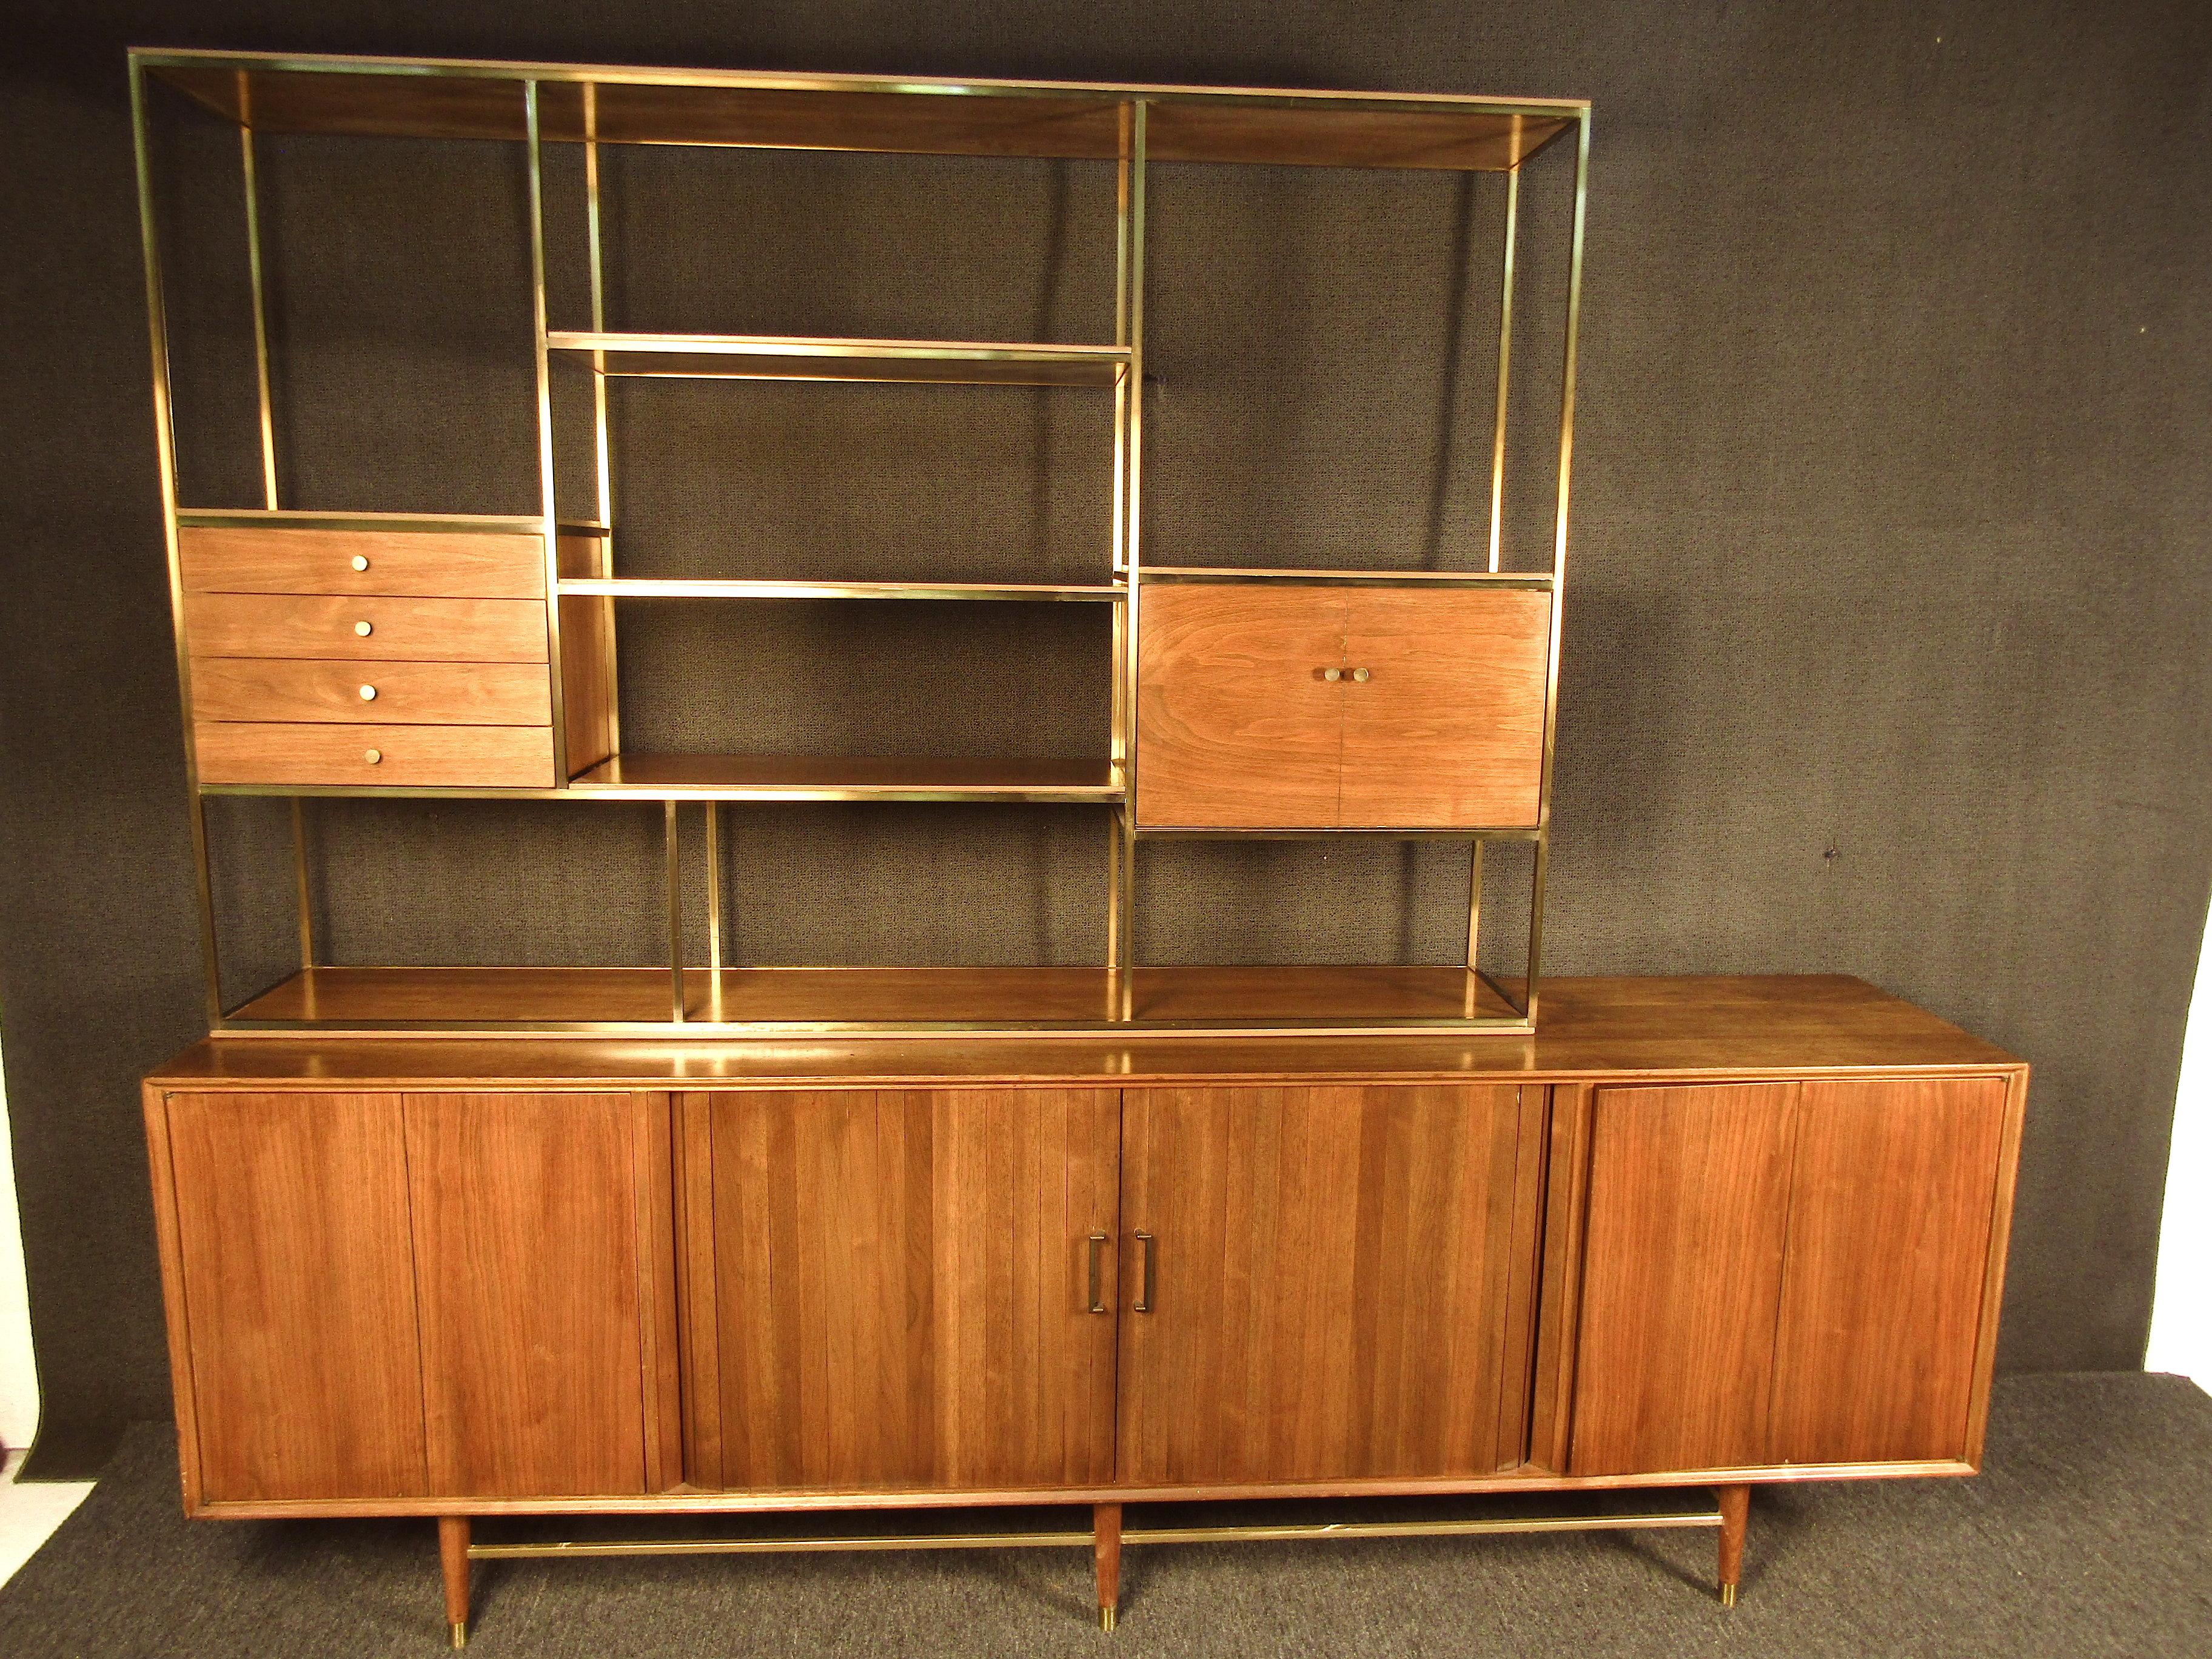 This beautiful wall unit boasts impressive size with style to match. Featuring deep wood grains and brass accents along with plenty of storage space this piece is both stunning and functional. Perfect for any dining room or entertainment space.